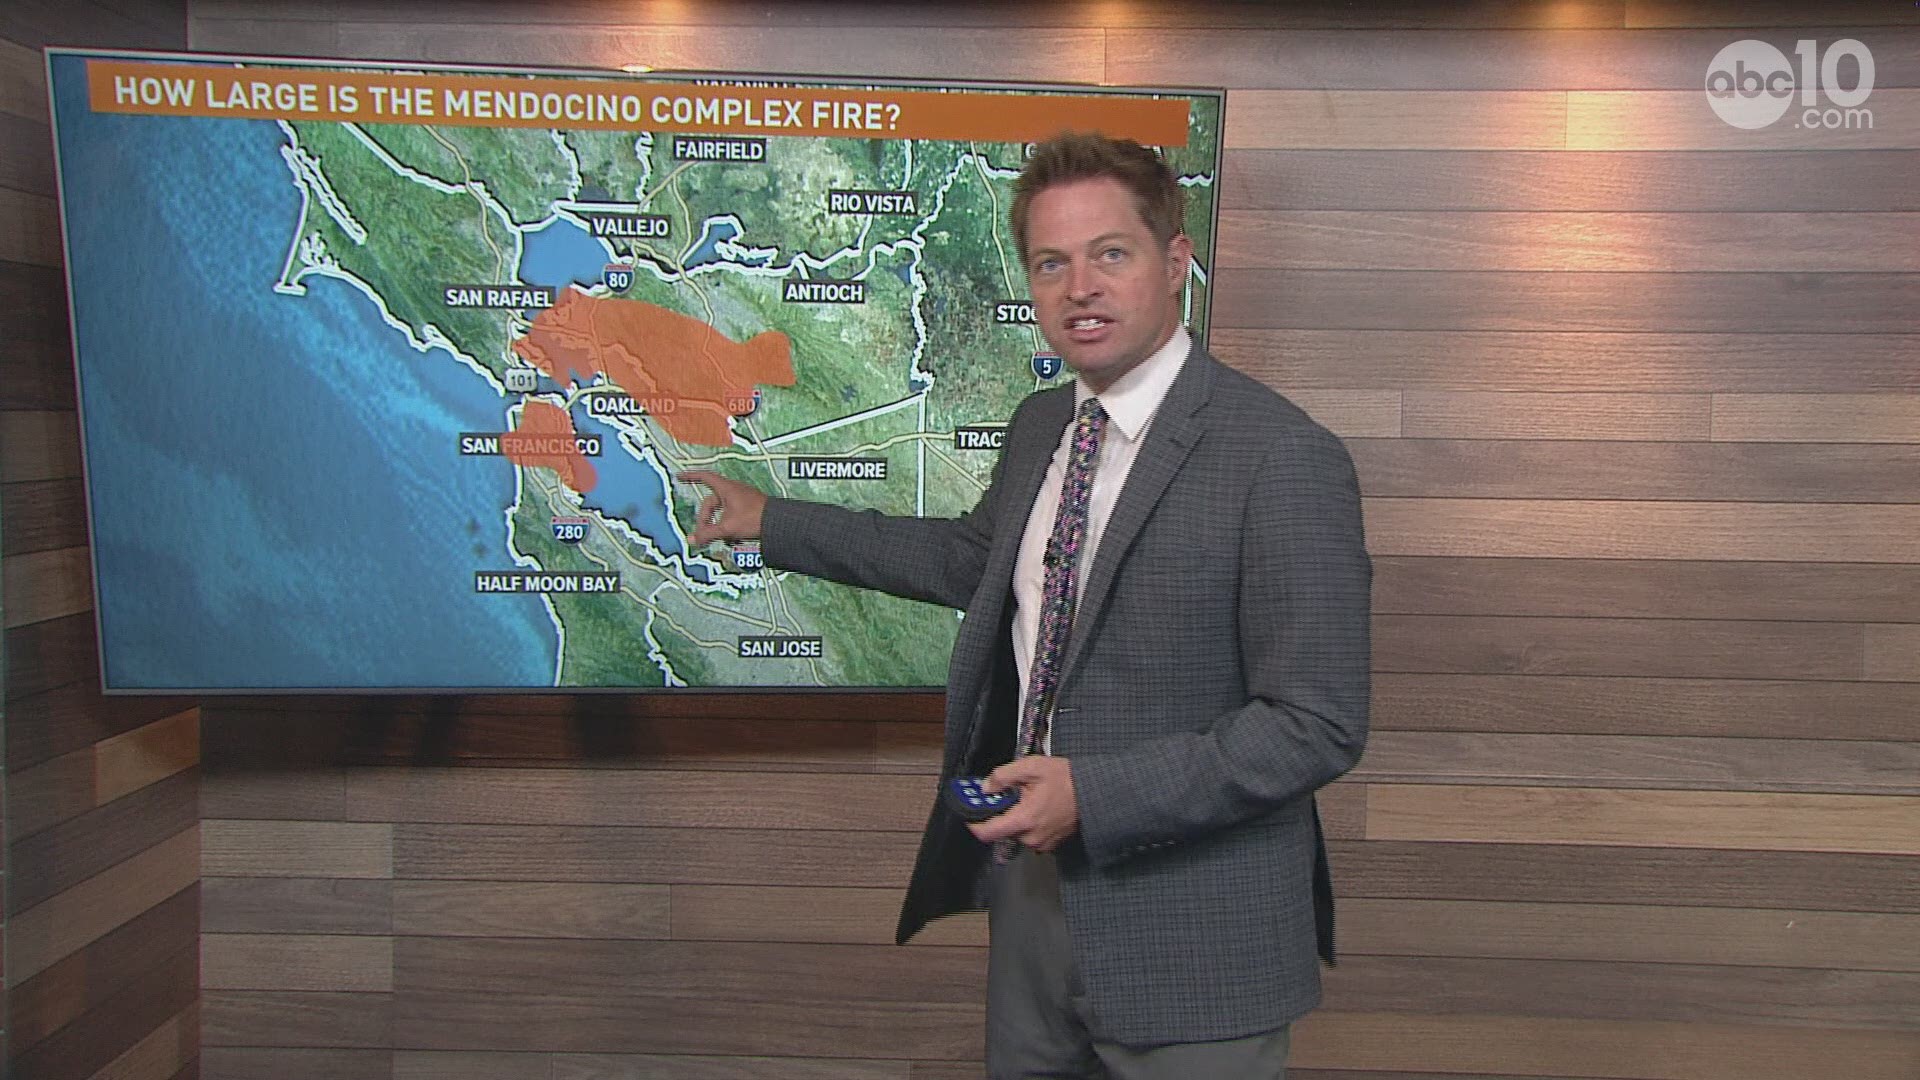 ABC10's Rob Carlmark looks at the Mendocino Complex Fire size in comparison to Metro Areas, as the fire has grown to be the largest in state history.